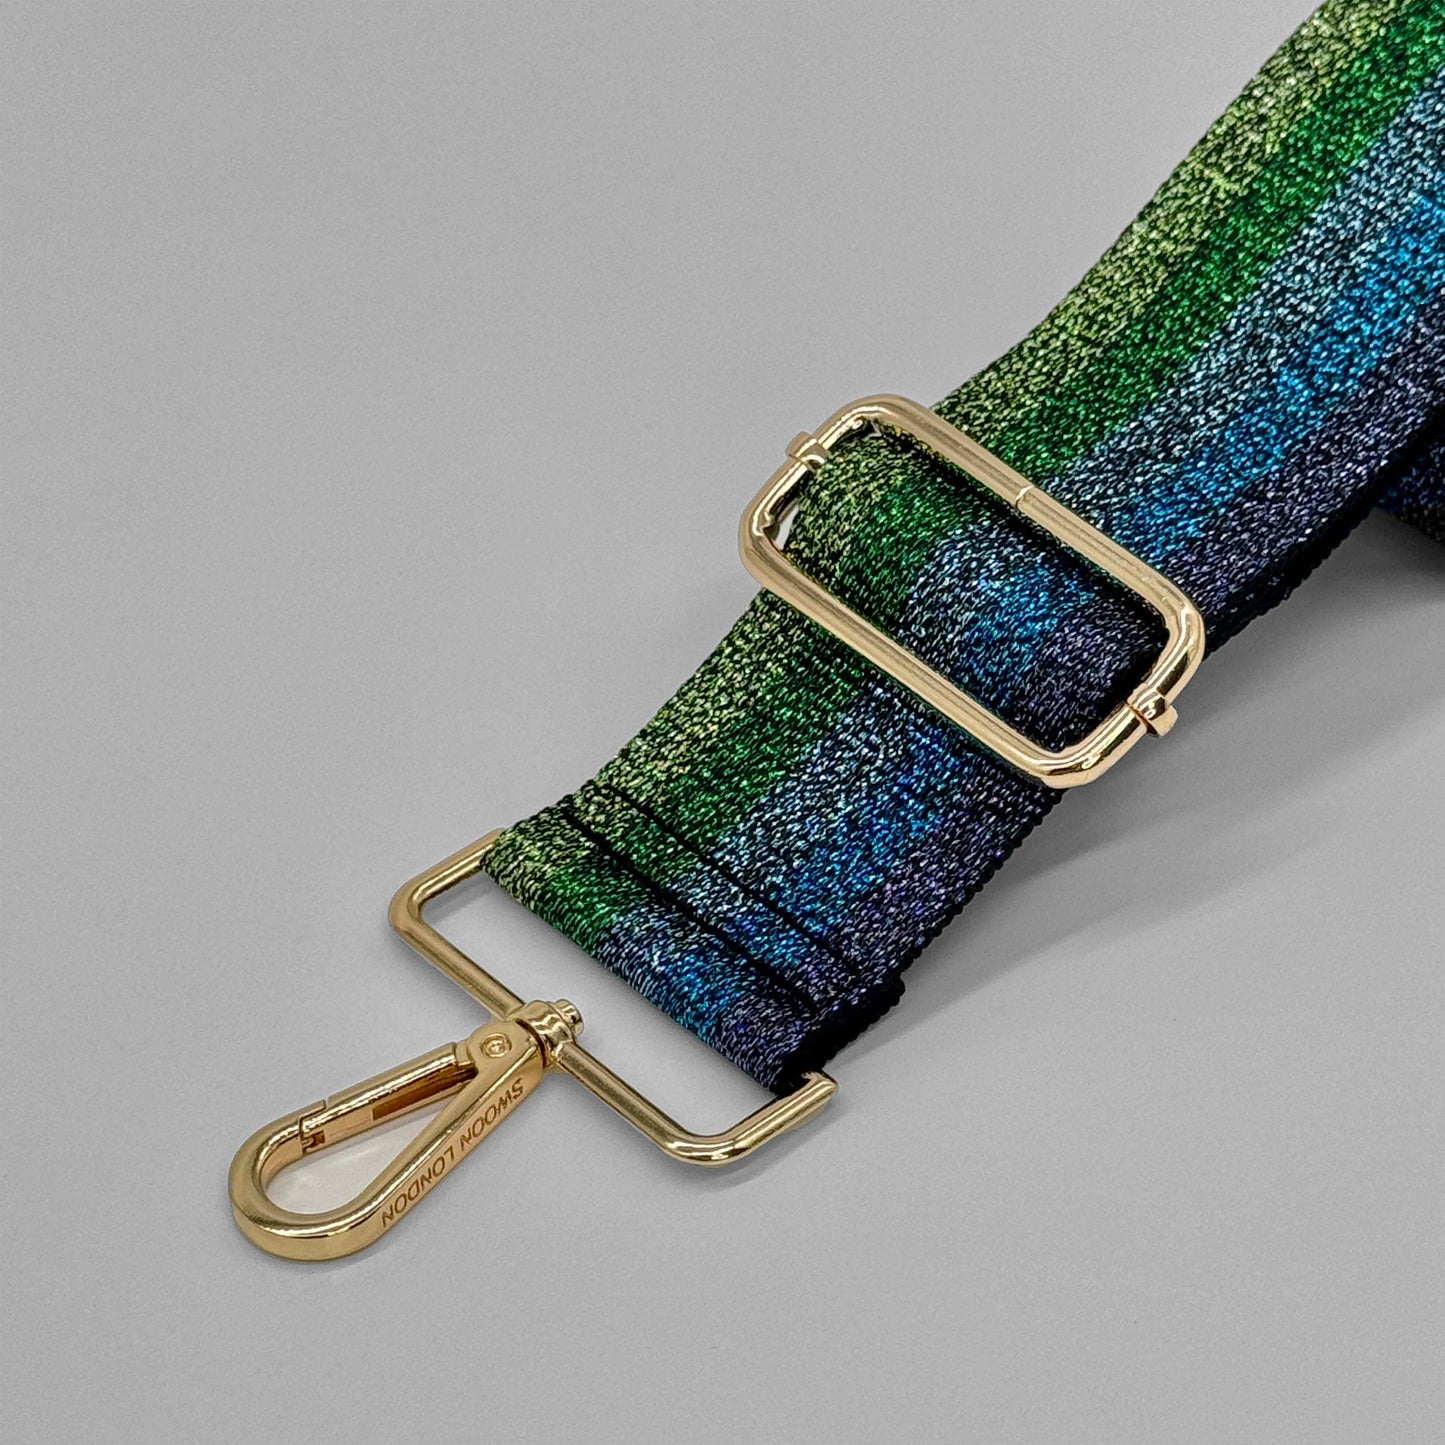 Blue Rainbow Bag Strap by Swoon London